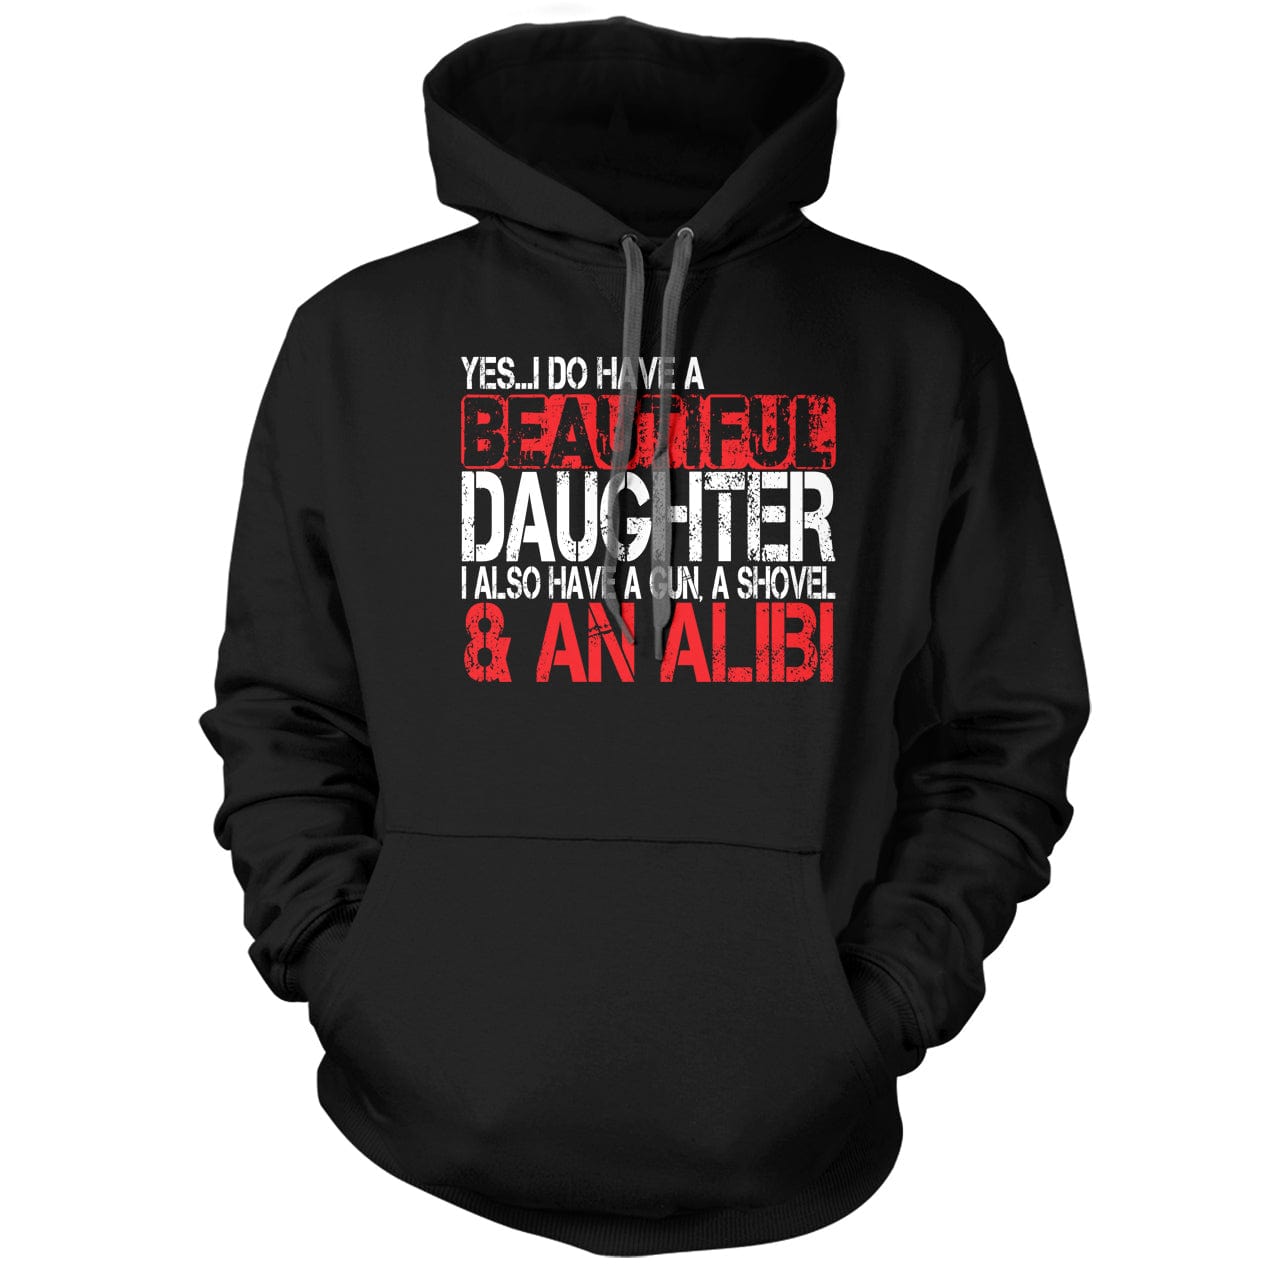 Yes I Do Have a Beautiful Daughter, a Gun, a Shovel, and an Alibi Hoodie